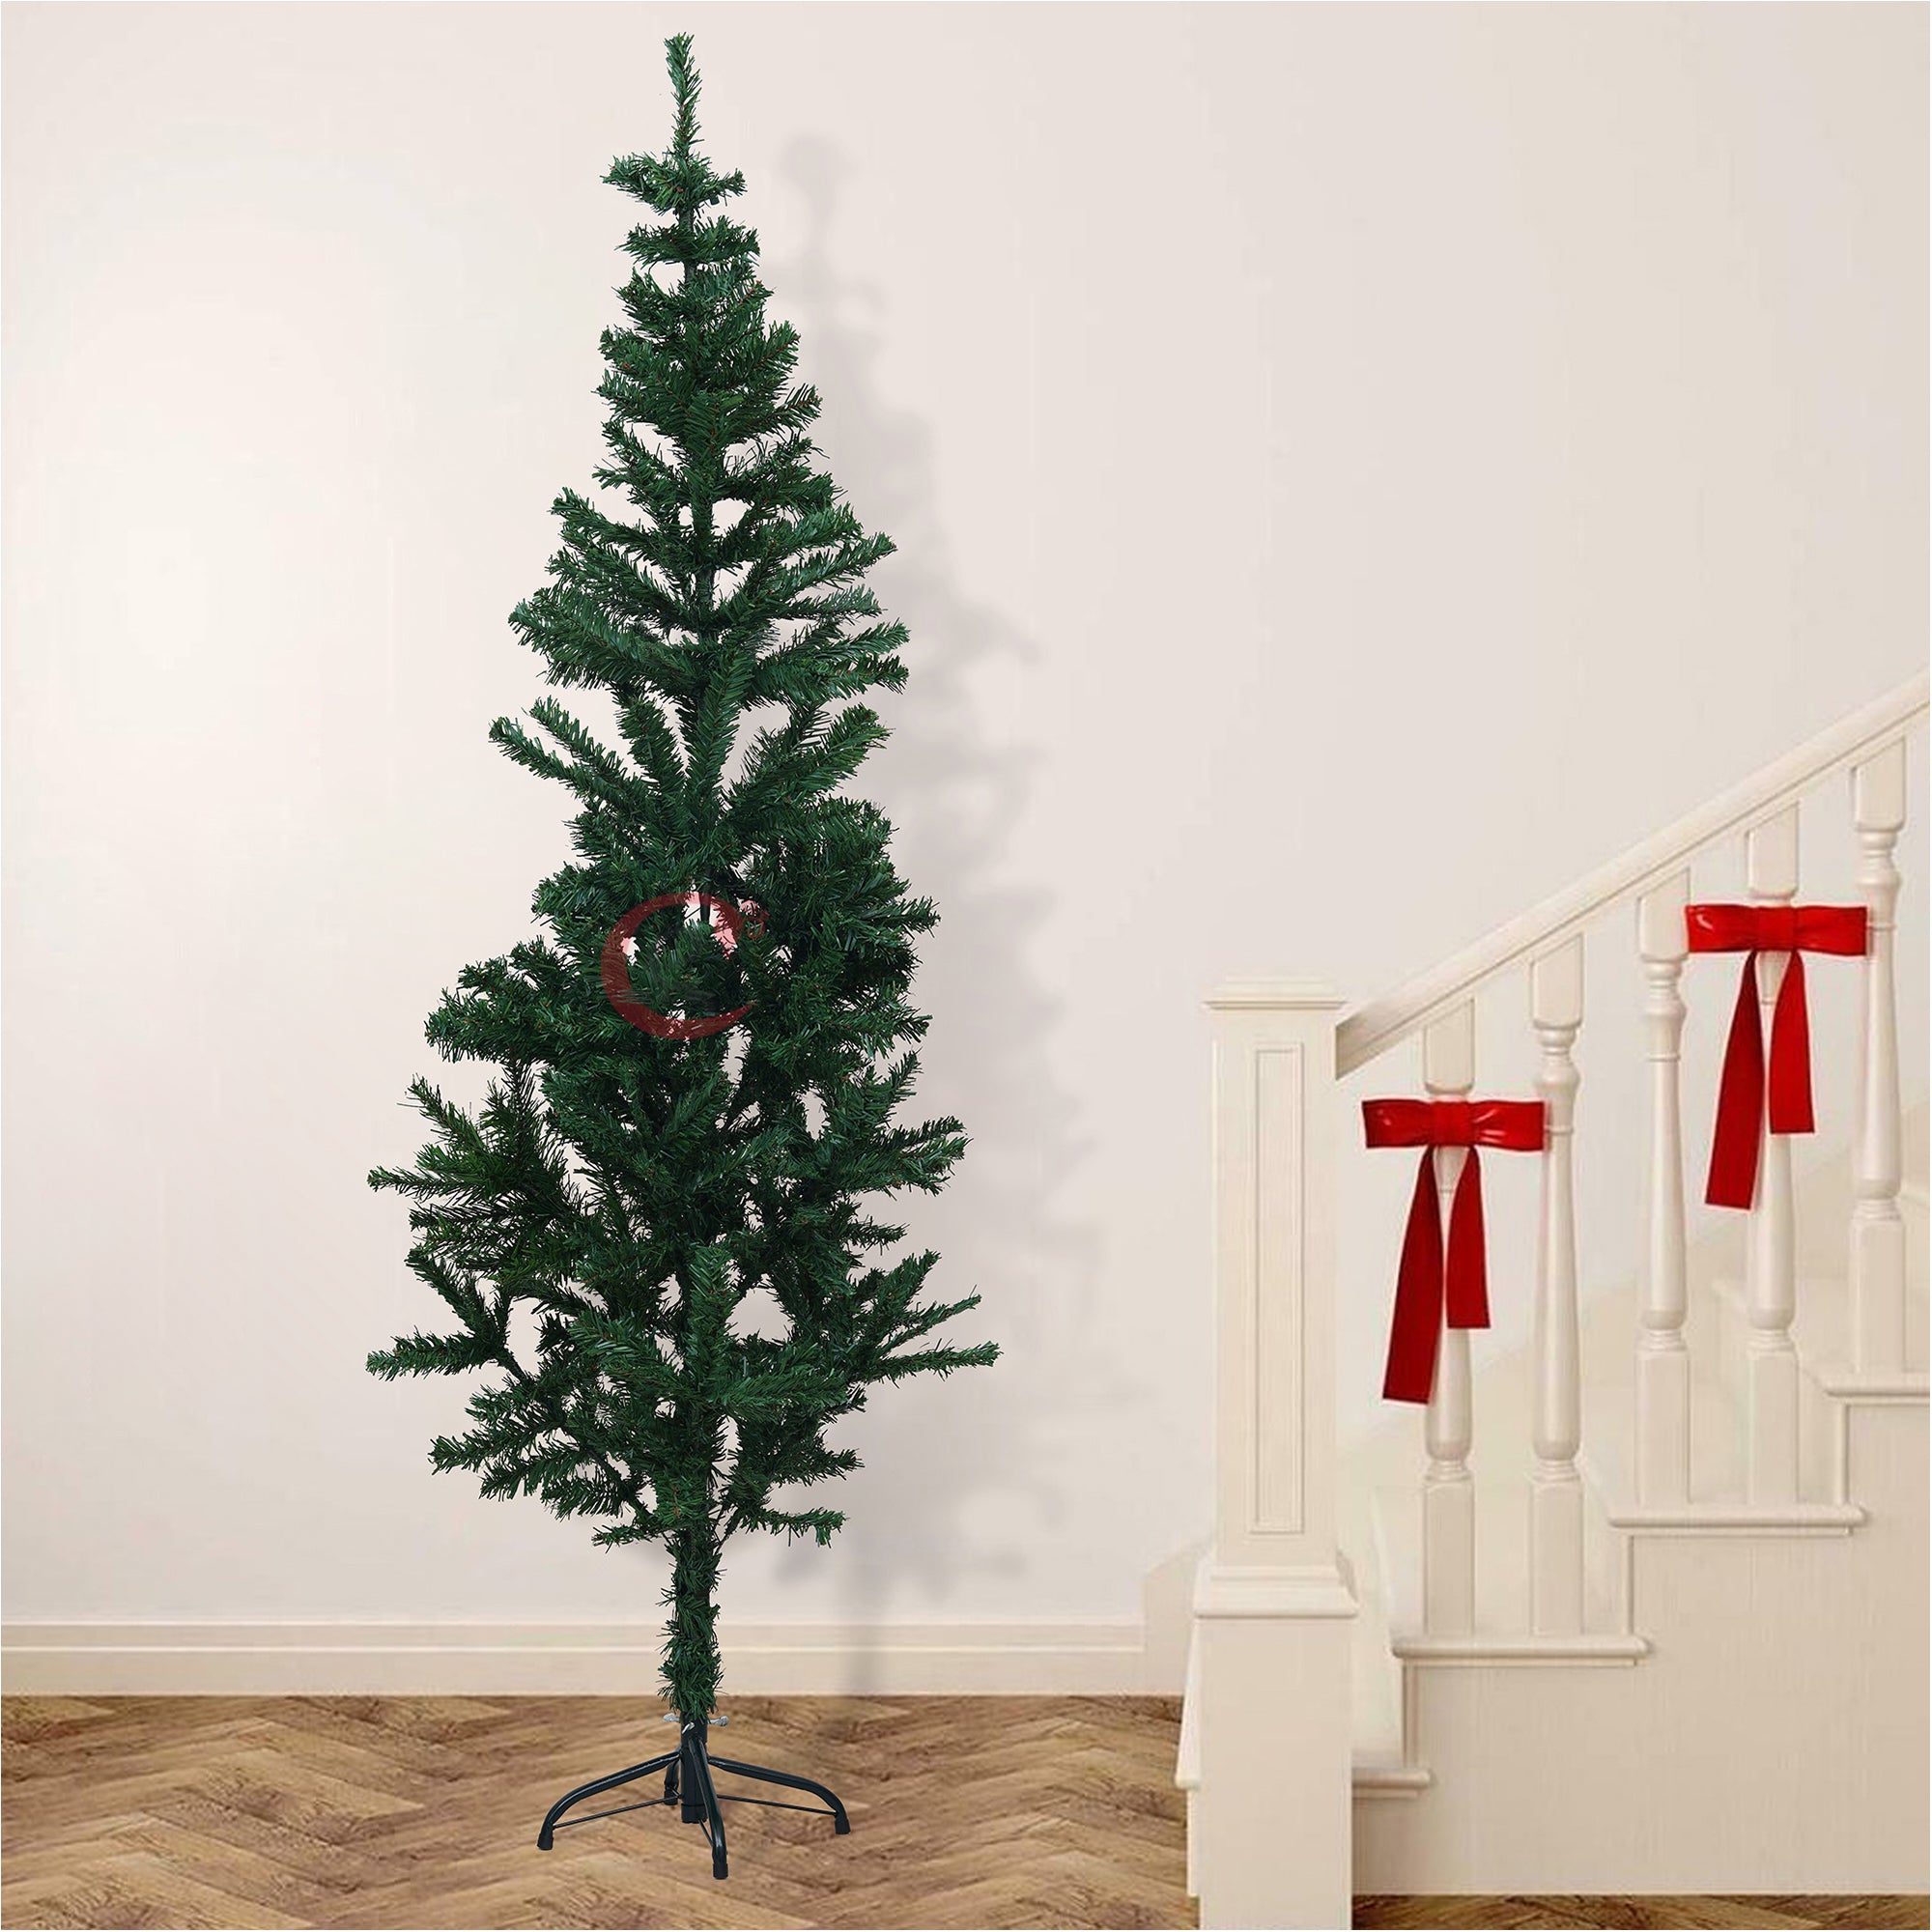 eCraftIndia 5 Feet Green Artificial Christmas Tree Xmas Pine Tree with Metal Stand - Xmas Tree for Indoor, Outdoor, Home, Living Room, Office, Church Decor - Merry Christmas Decoration Item 1